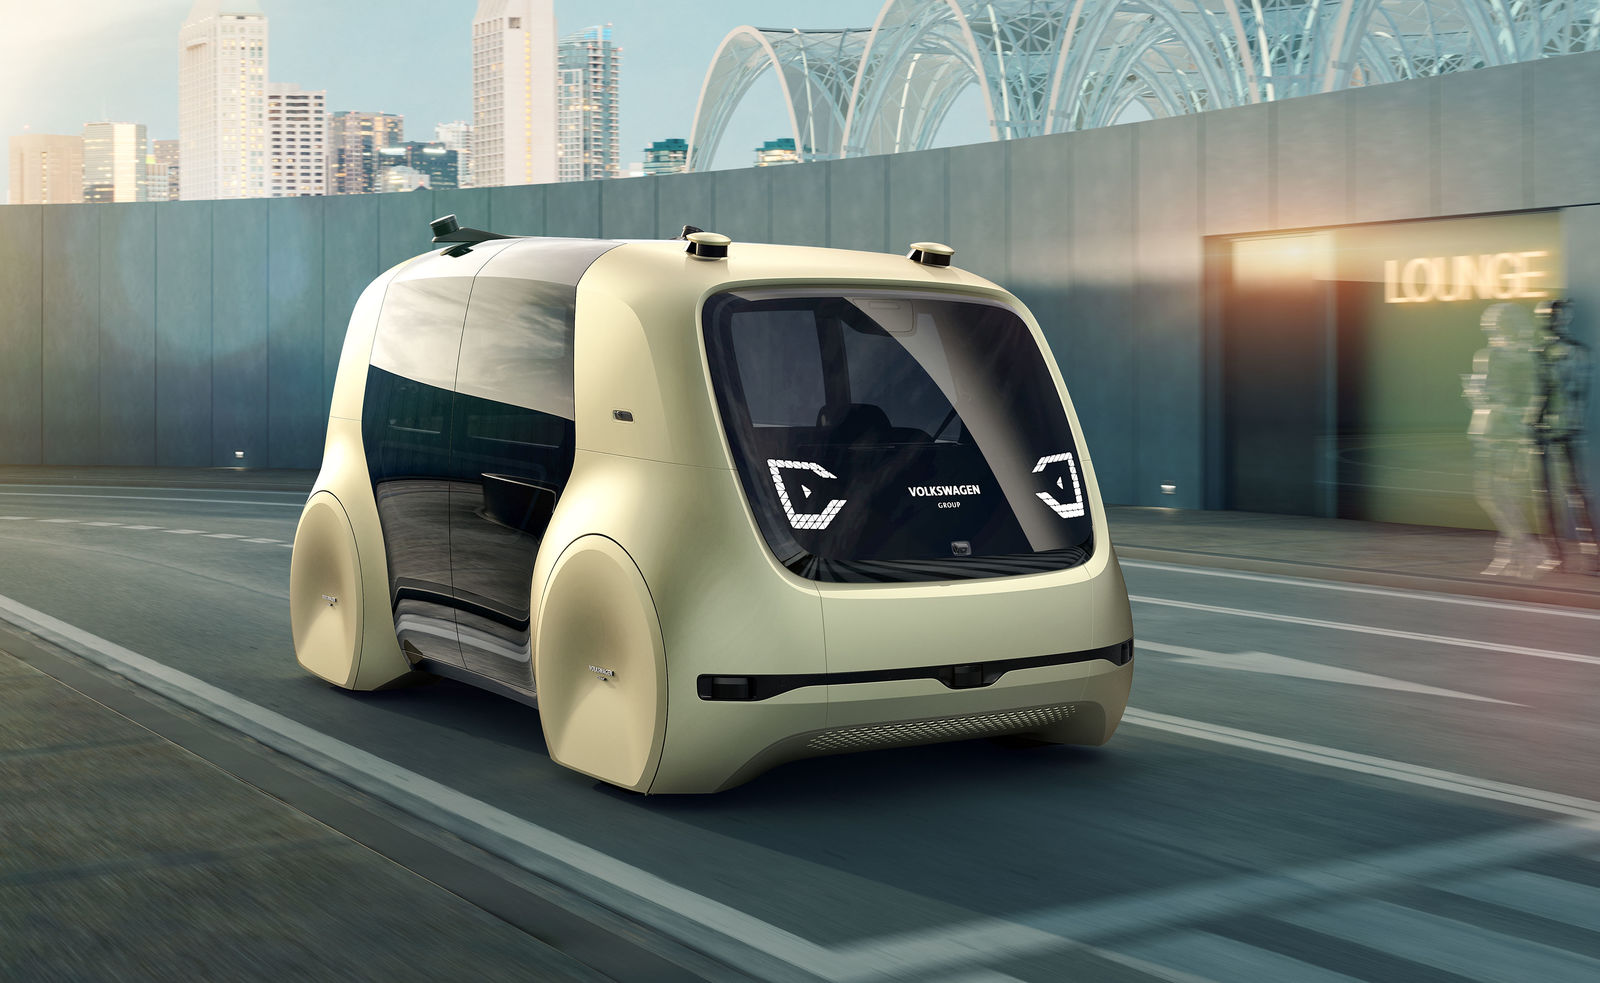 SEDRIC – The Self-Driving Car from the Volkswagen Group was developed for autonomous driving.